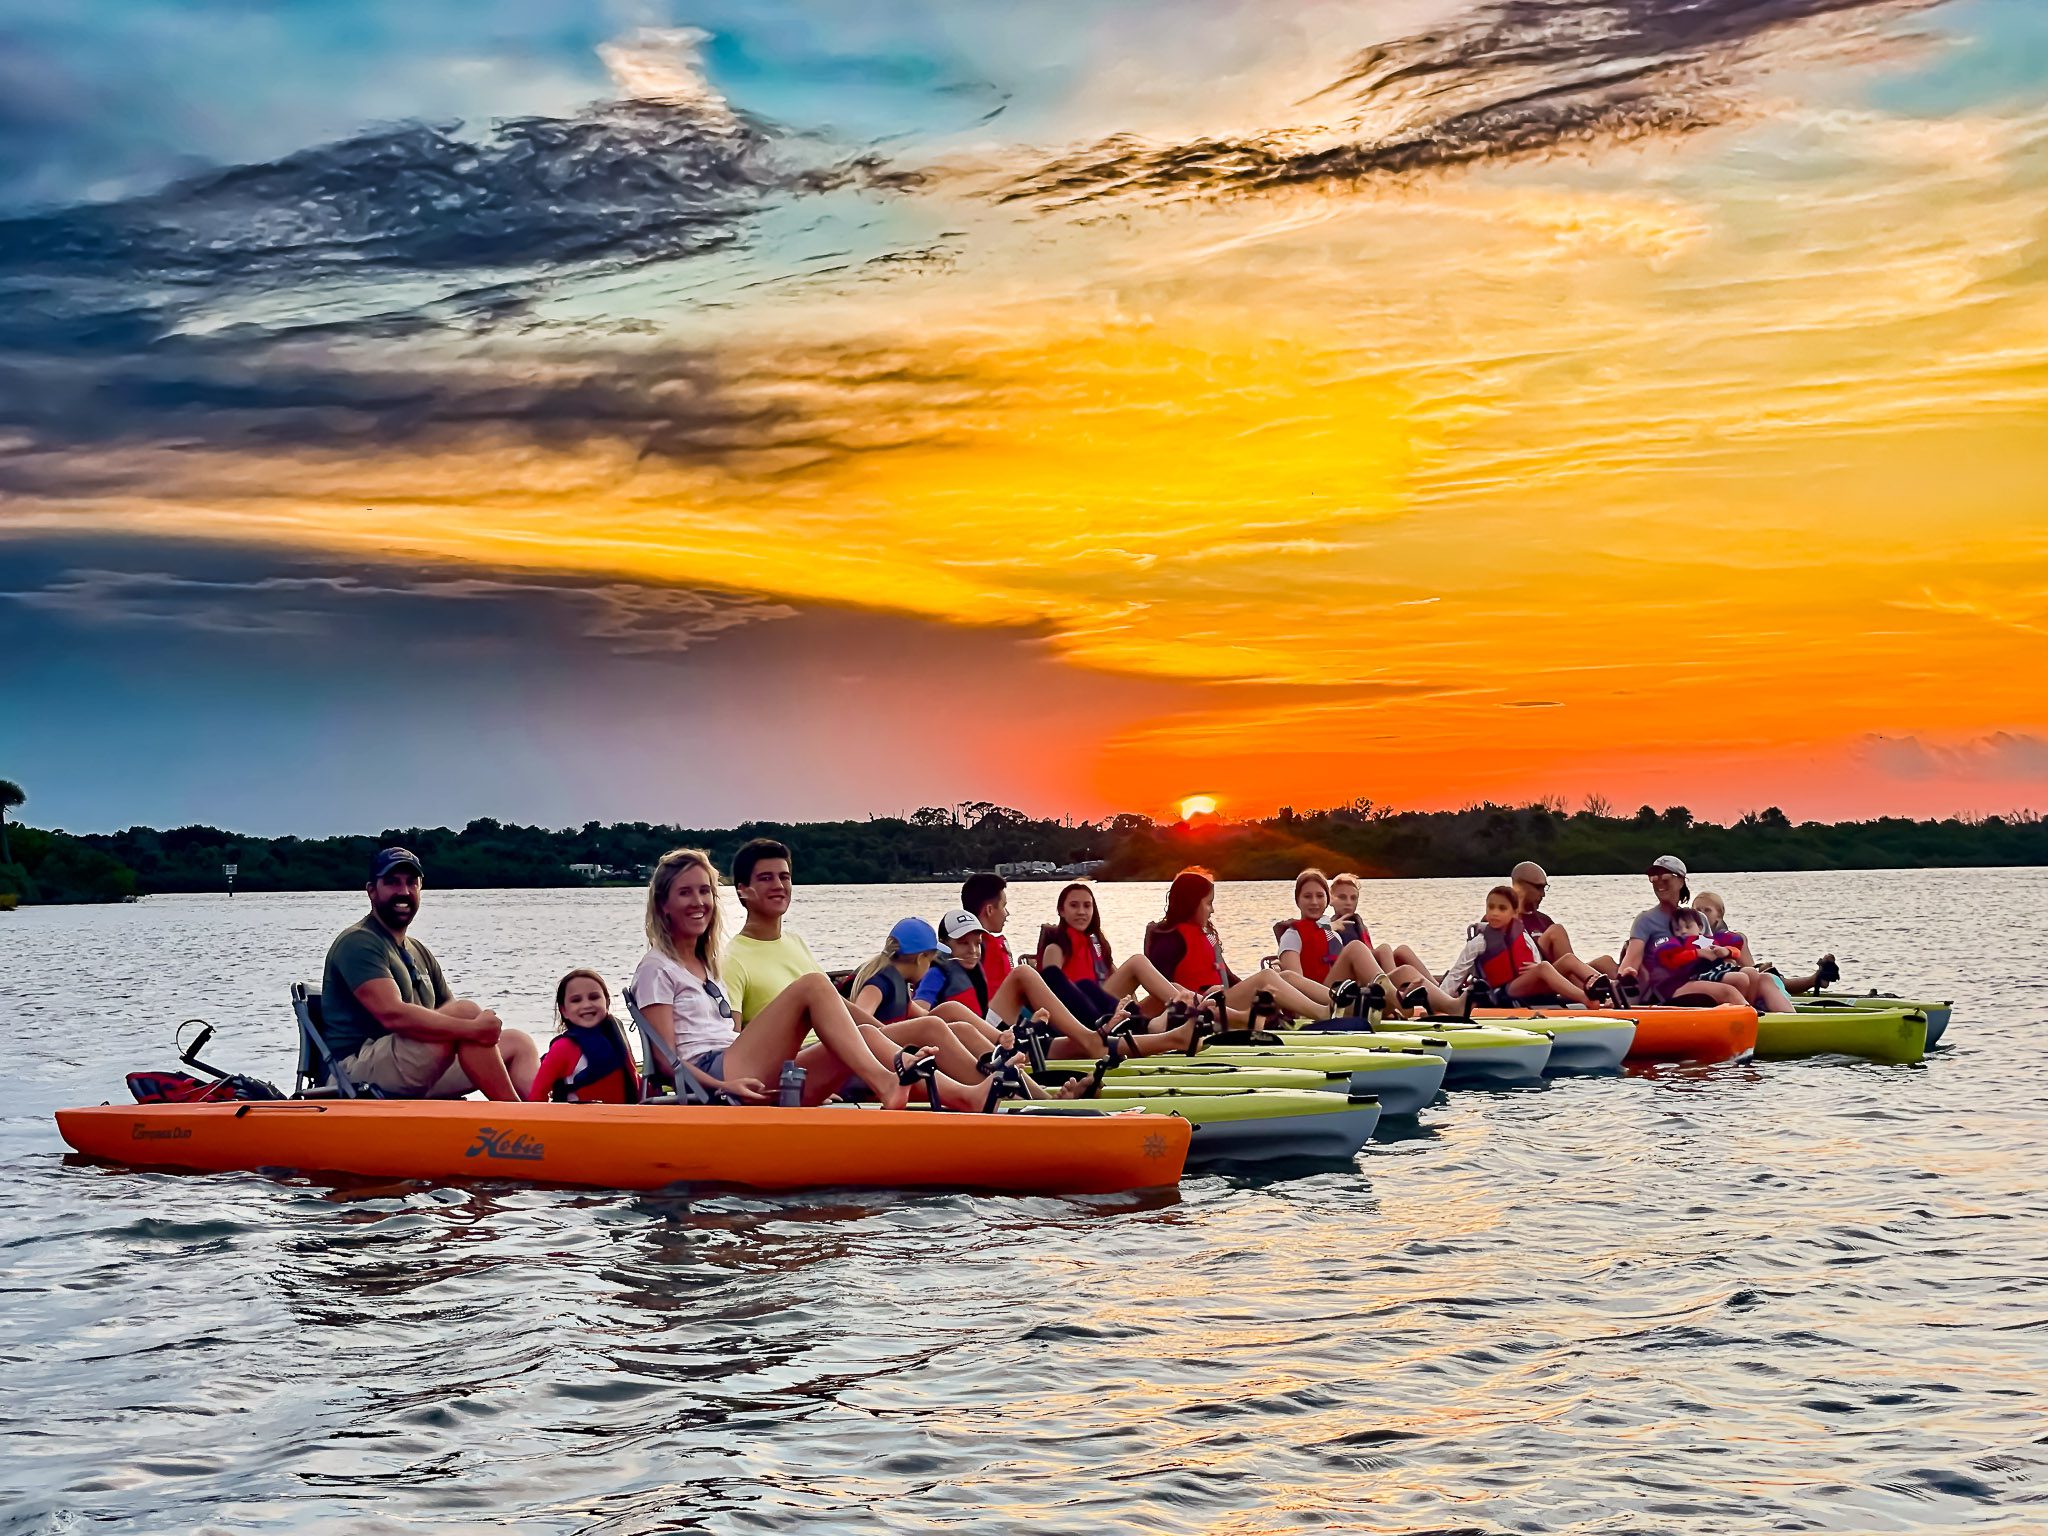 Group picture of full tour group on guided kayak tour with sunsets on the Indian River North along Canaveral National Seashore. These National Park guided kayak tours are in New Smyrna Beach nearby Orlando and Daytona Beach.